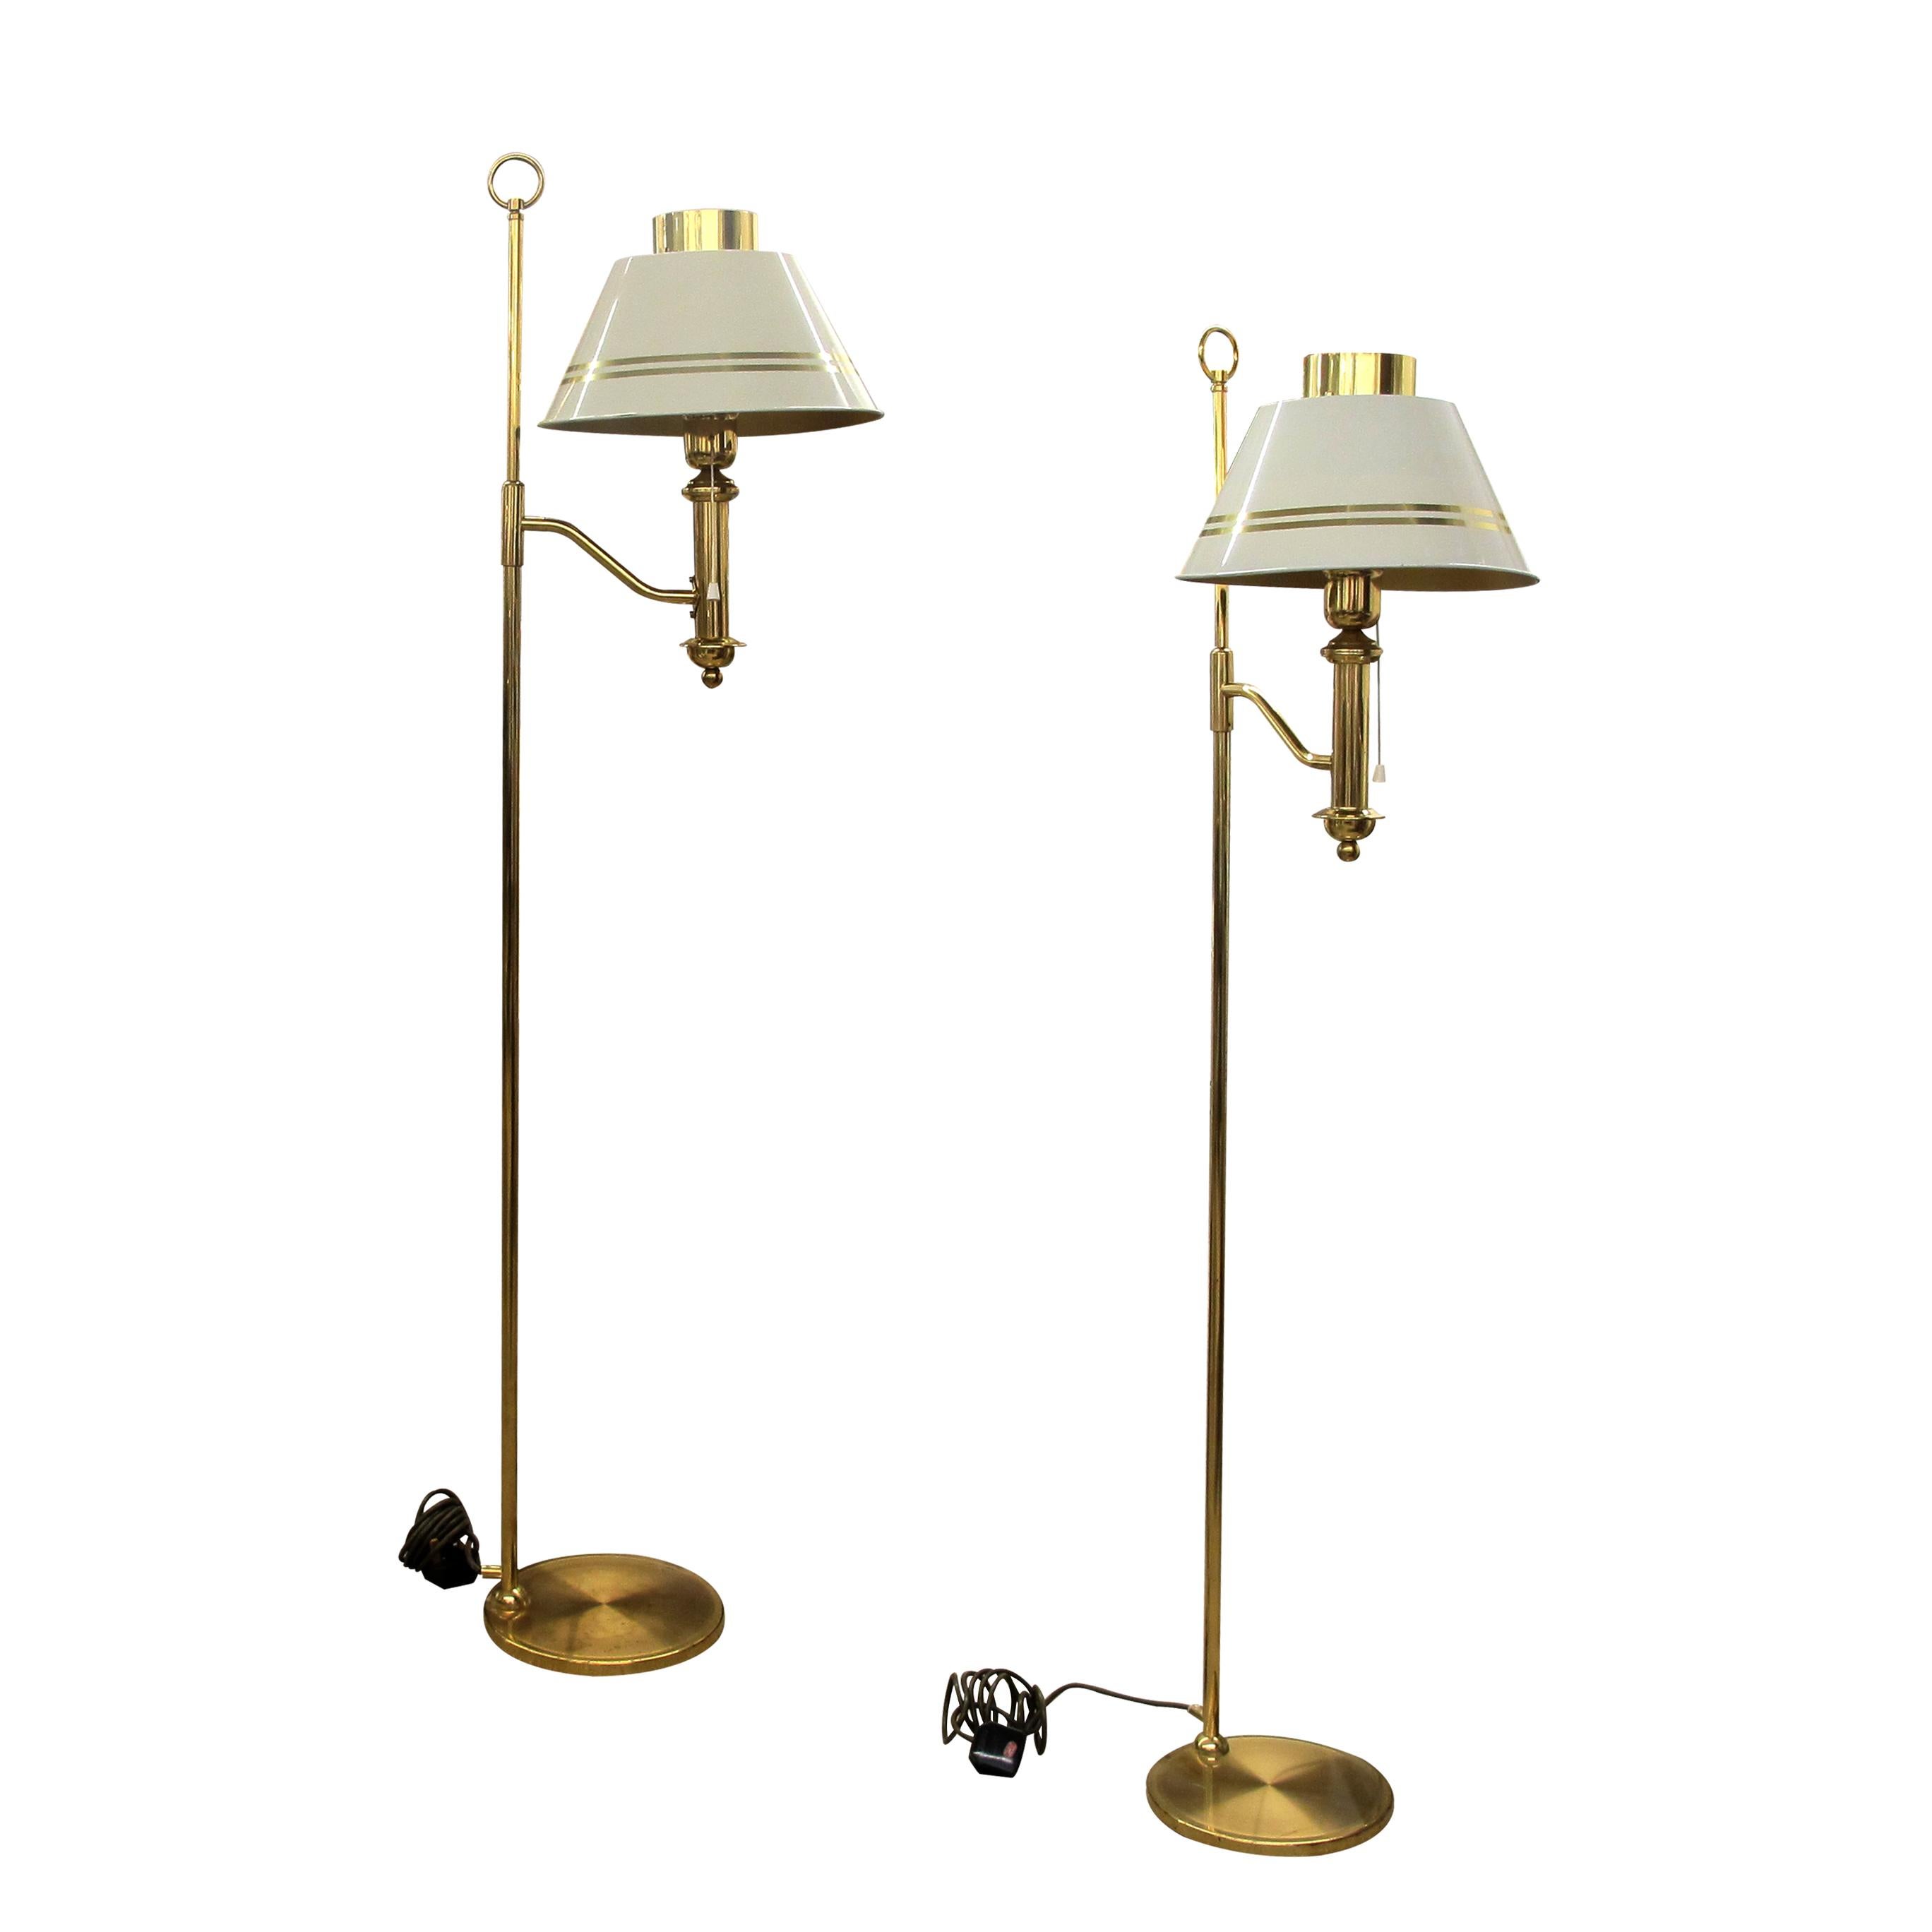 Pair of elegant 1970s bracket floor lamps with white metal shades. Each lamp has its own custom-made white metal shade. The on and on switch is operated with a pull string. The lamps are in good condition with some signs of wear commensurate with